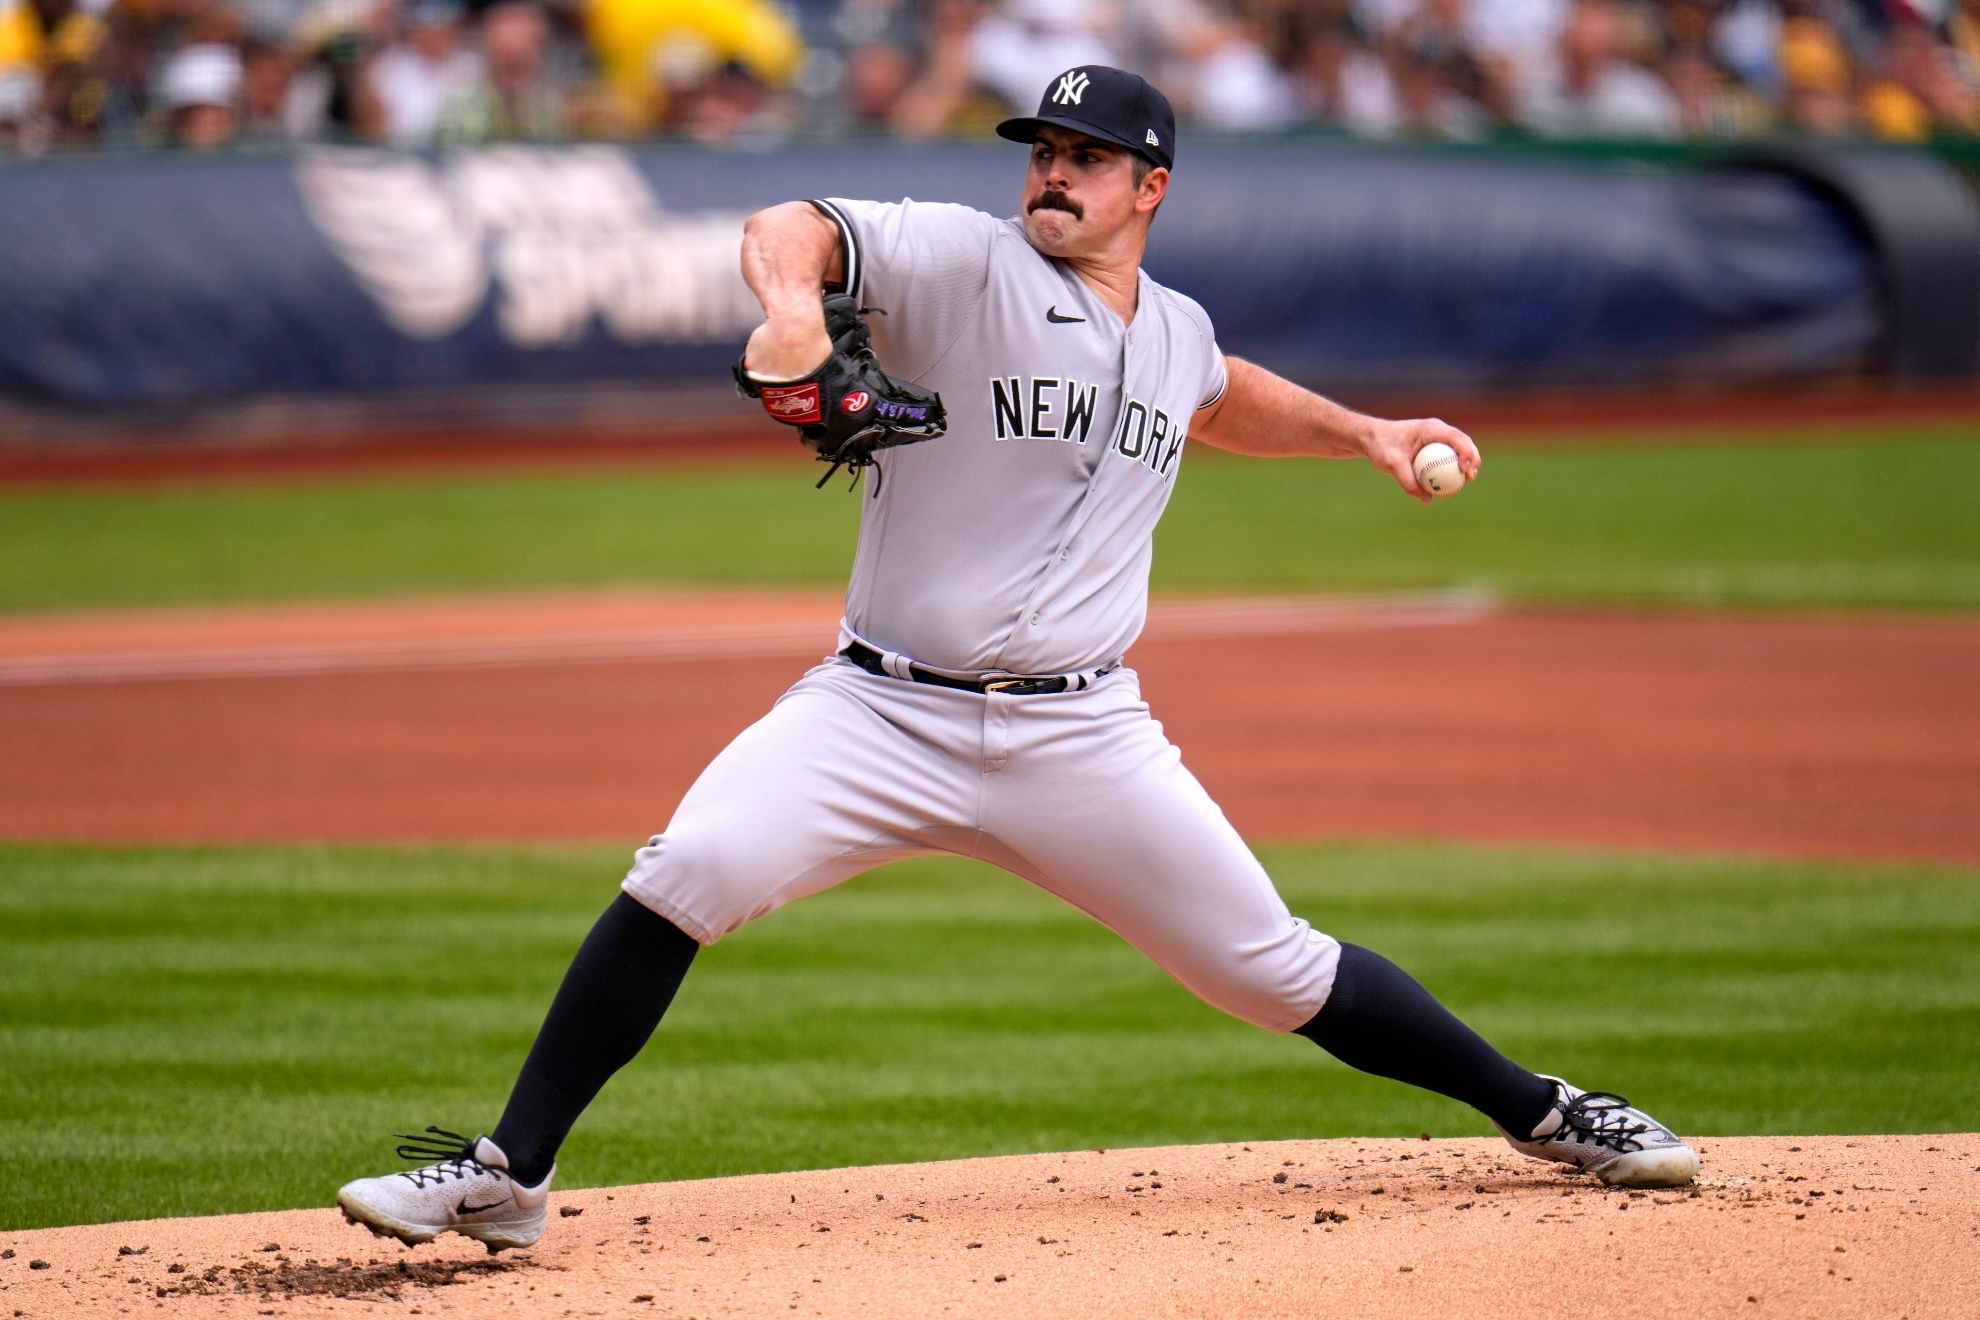 Carlos Rodon pitching for the New York Yankees